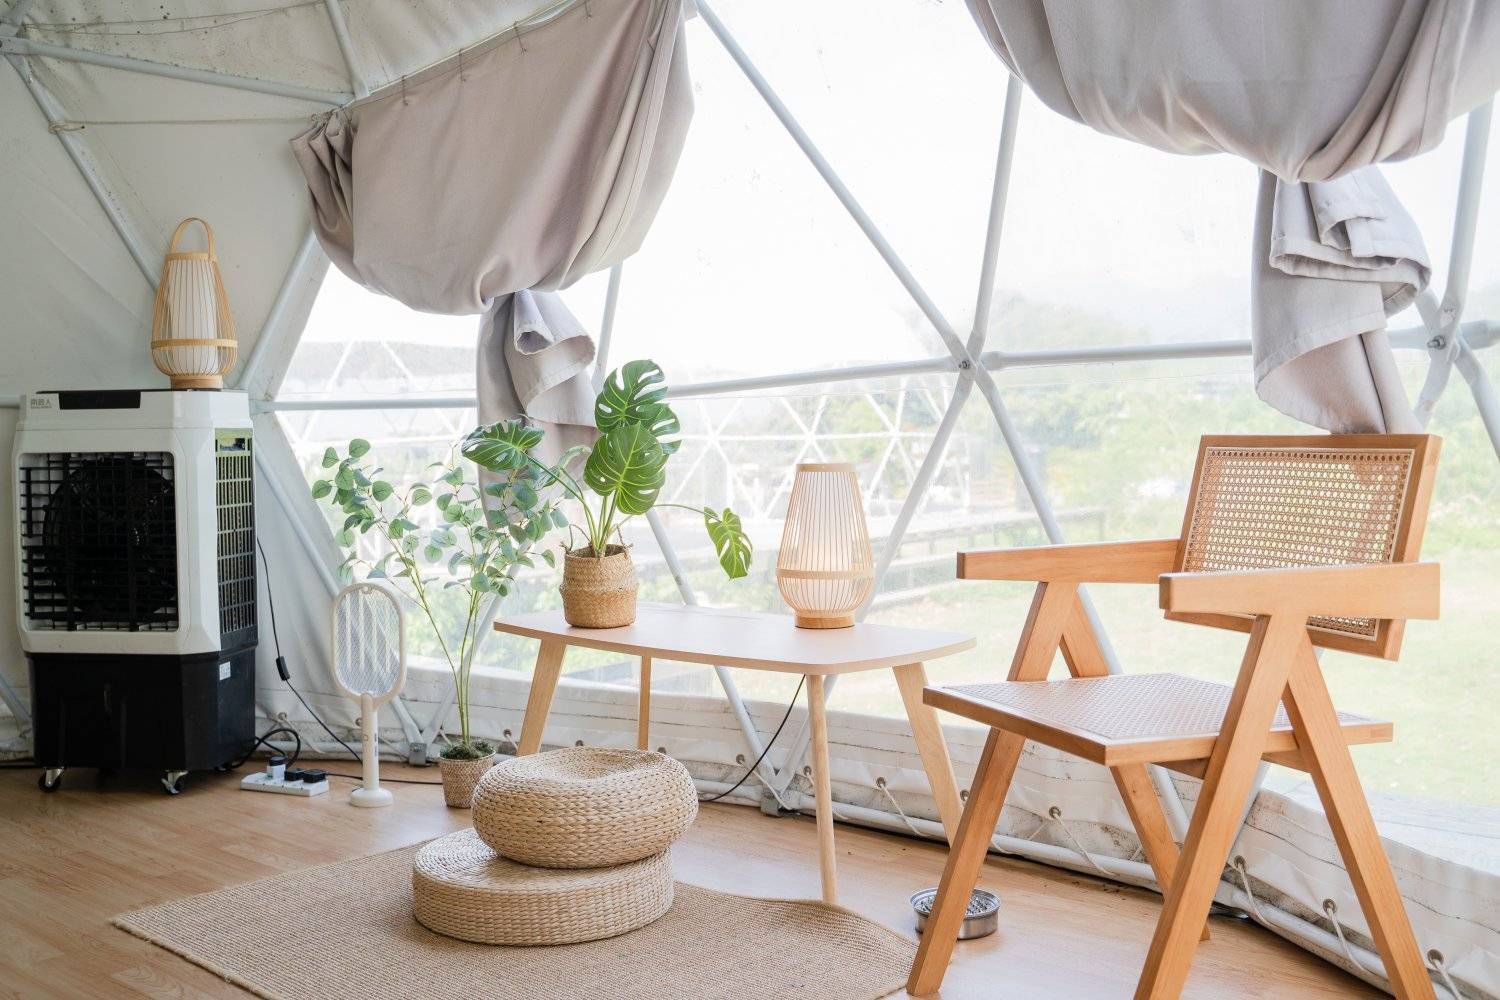 Nomad Terrace - Dome & Bell Tent & Glamping Tent 【Private Platform】 5M Dome Tent  (4 pax) - Zone D terraced area｜Nomad Terrance 10